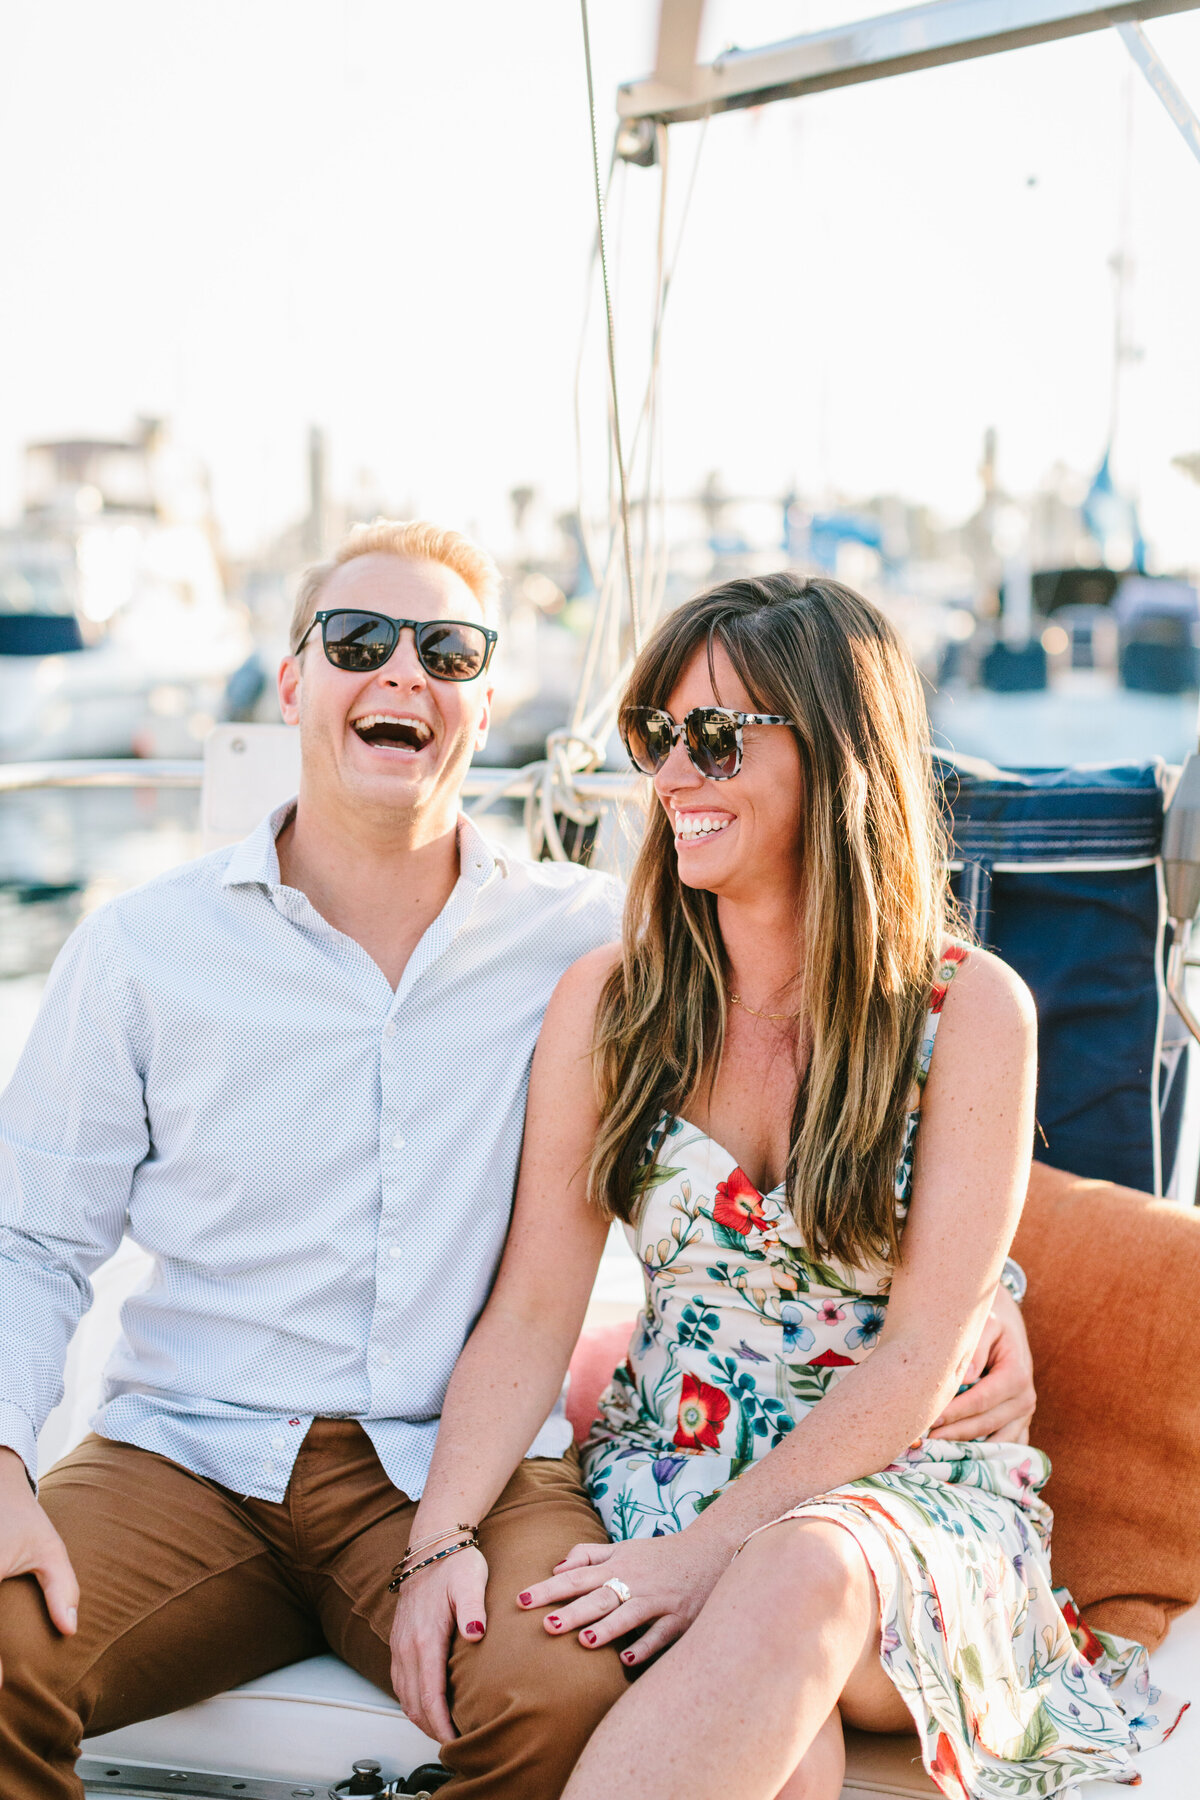 Best California and Texas Engagement Photographer-Jodee Debes Photography-273